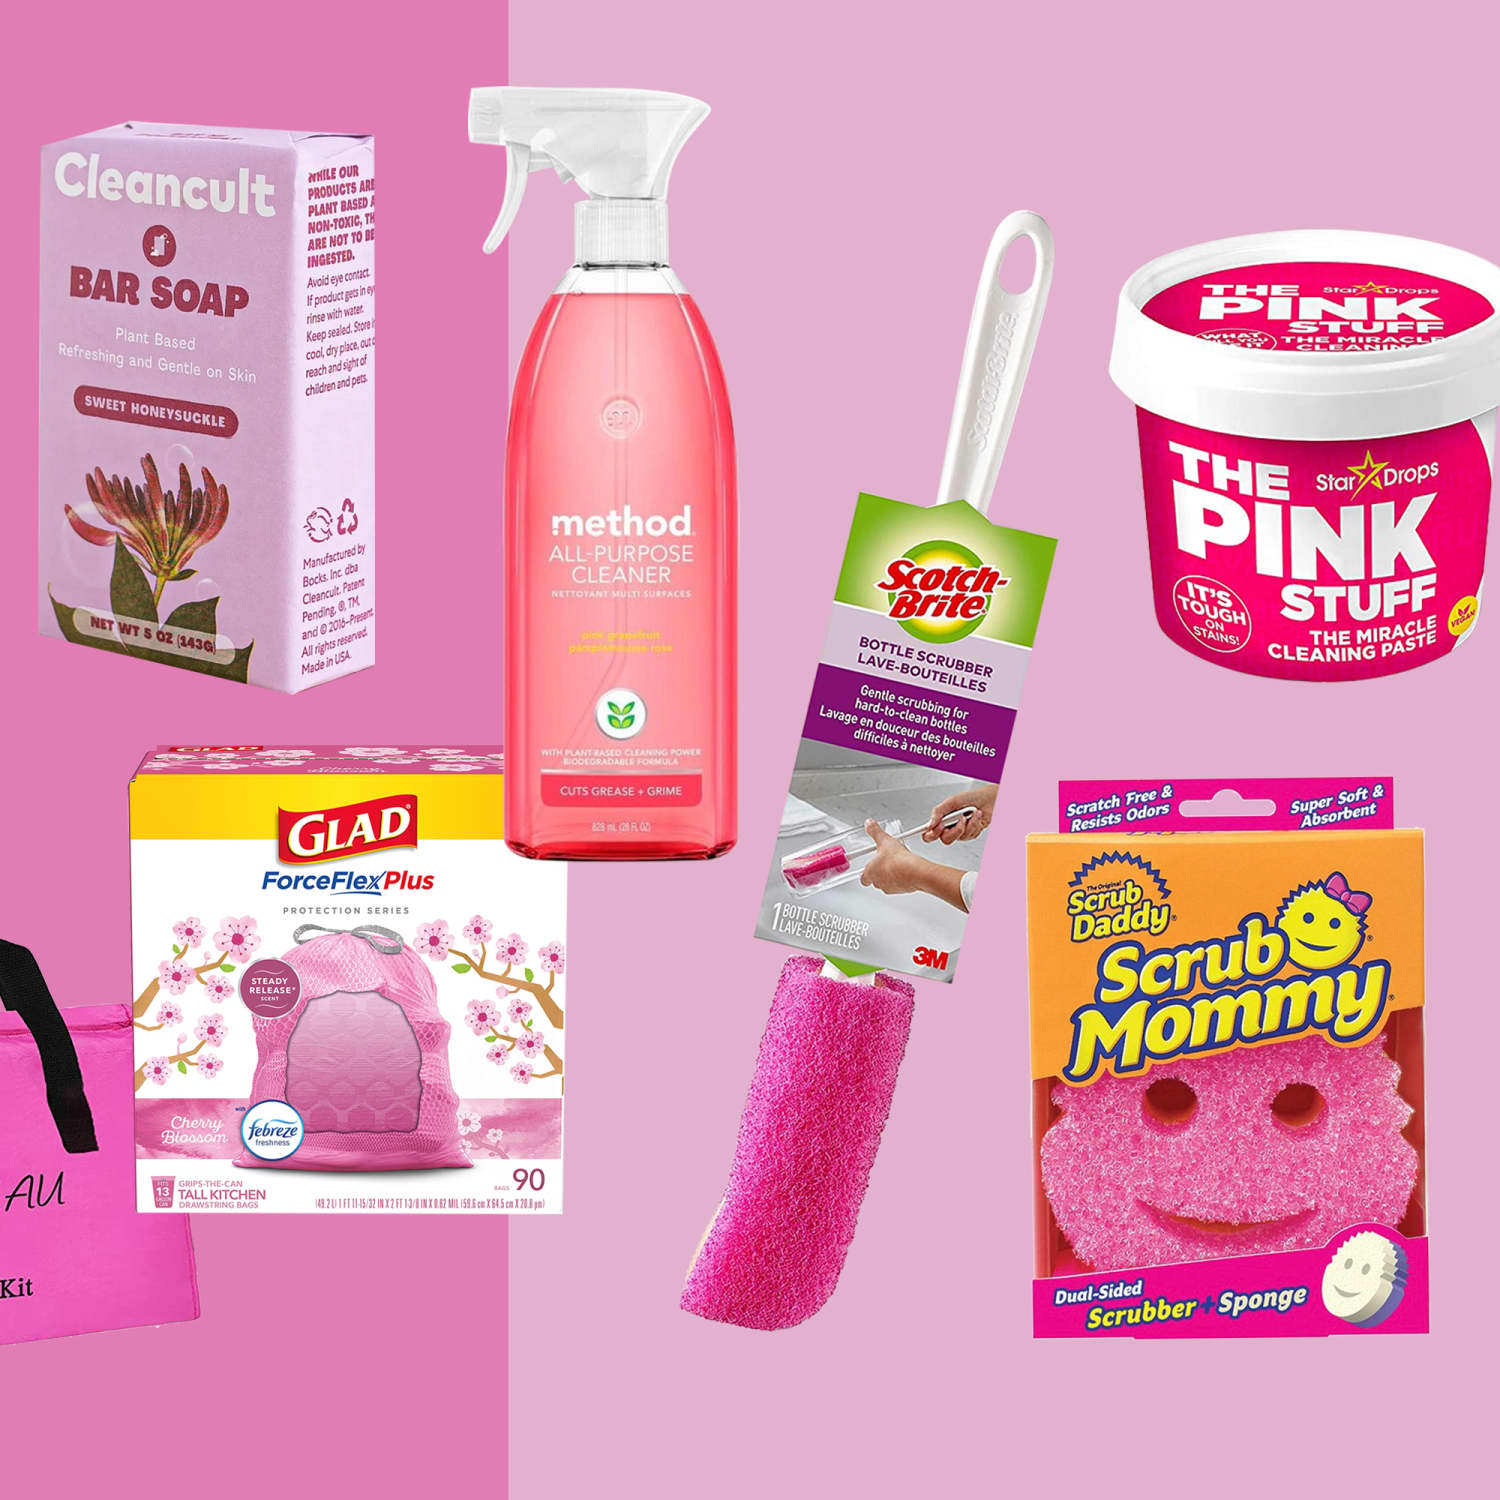 spring cleaning gadgets: Shop The Pink Stuff, Scrub Daddy